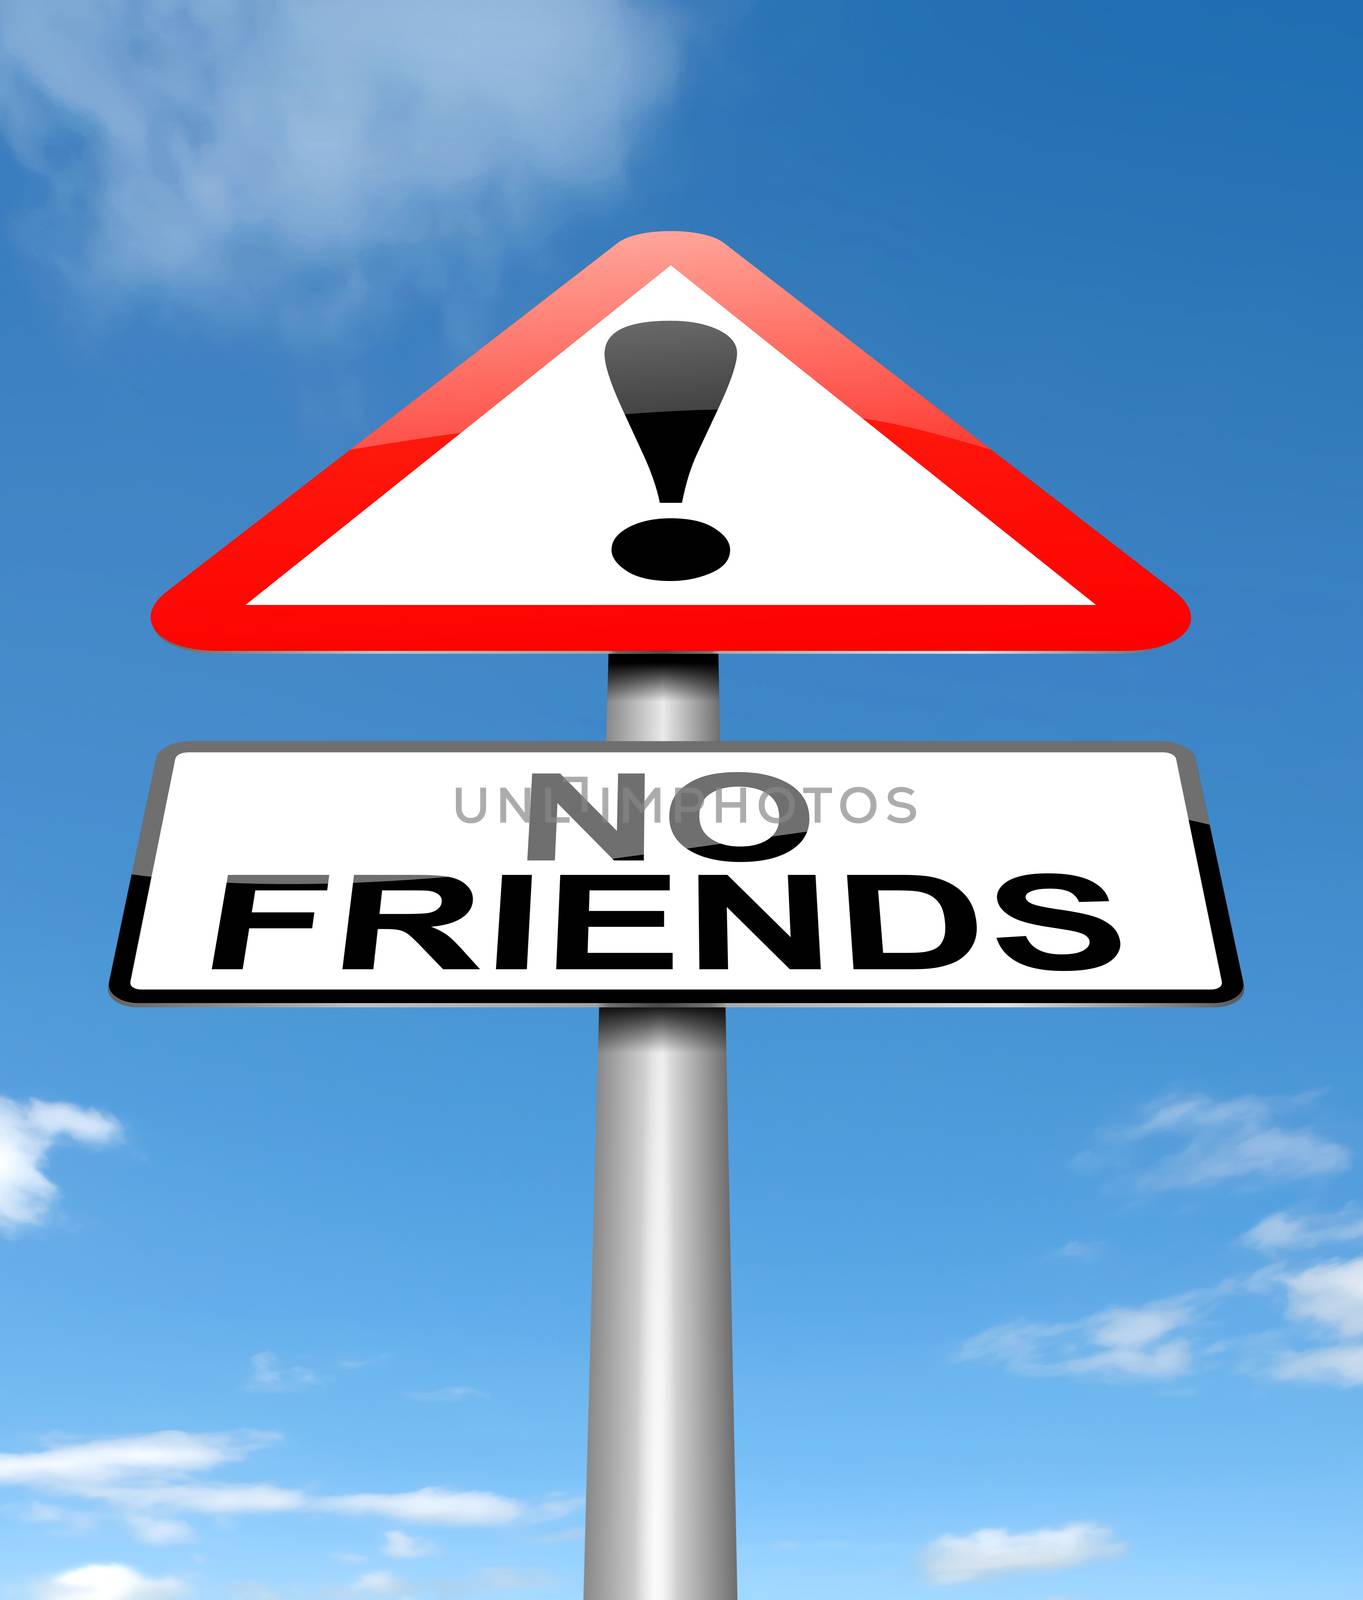 Illustration depicting a sign with a no friends concept.